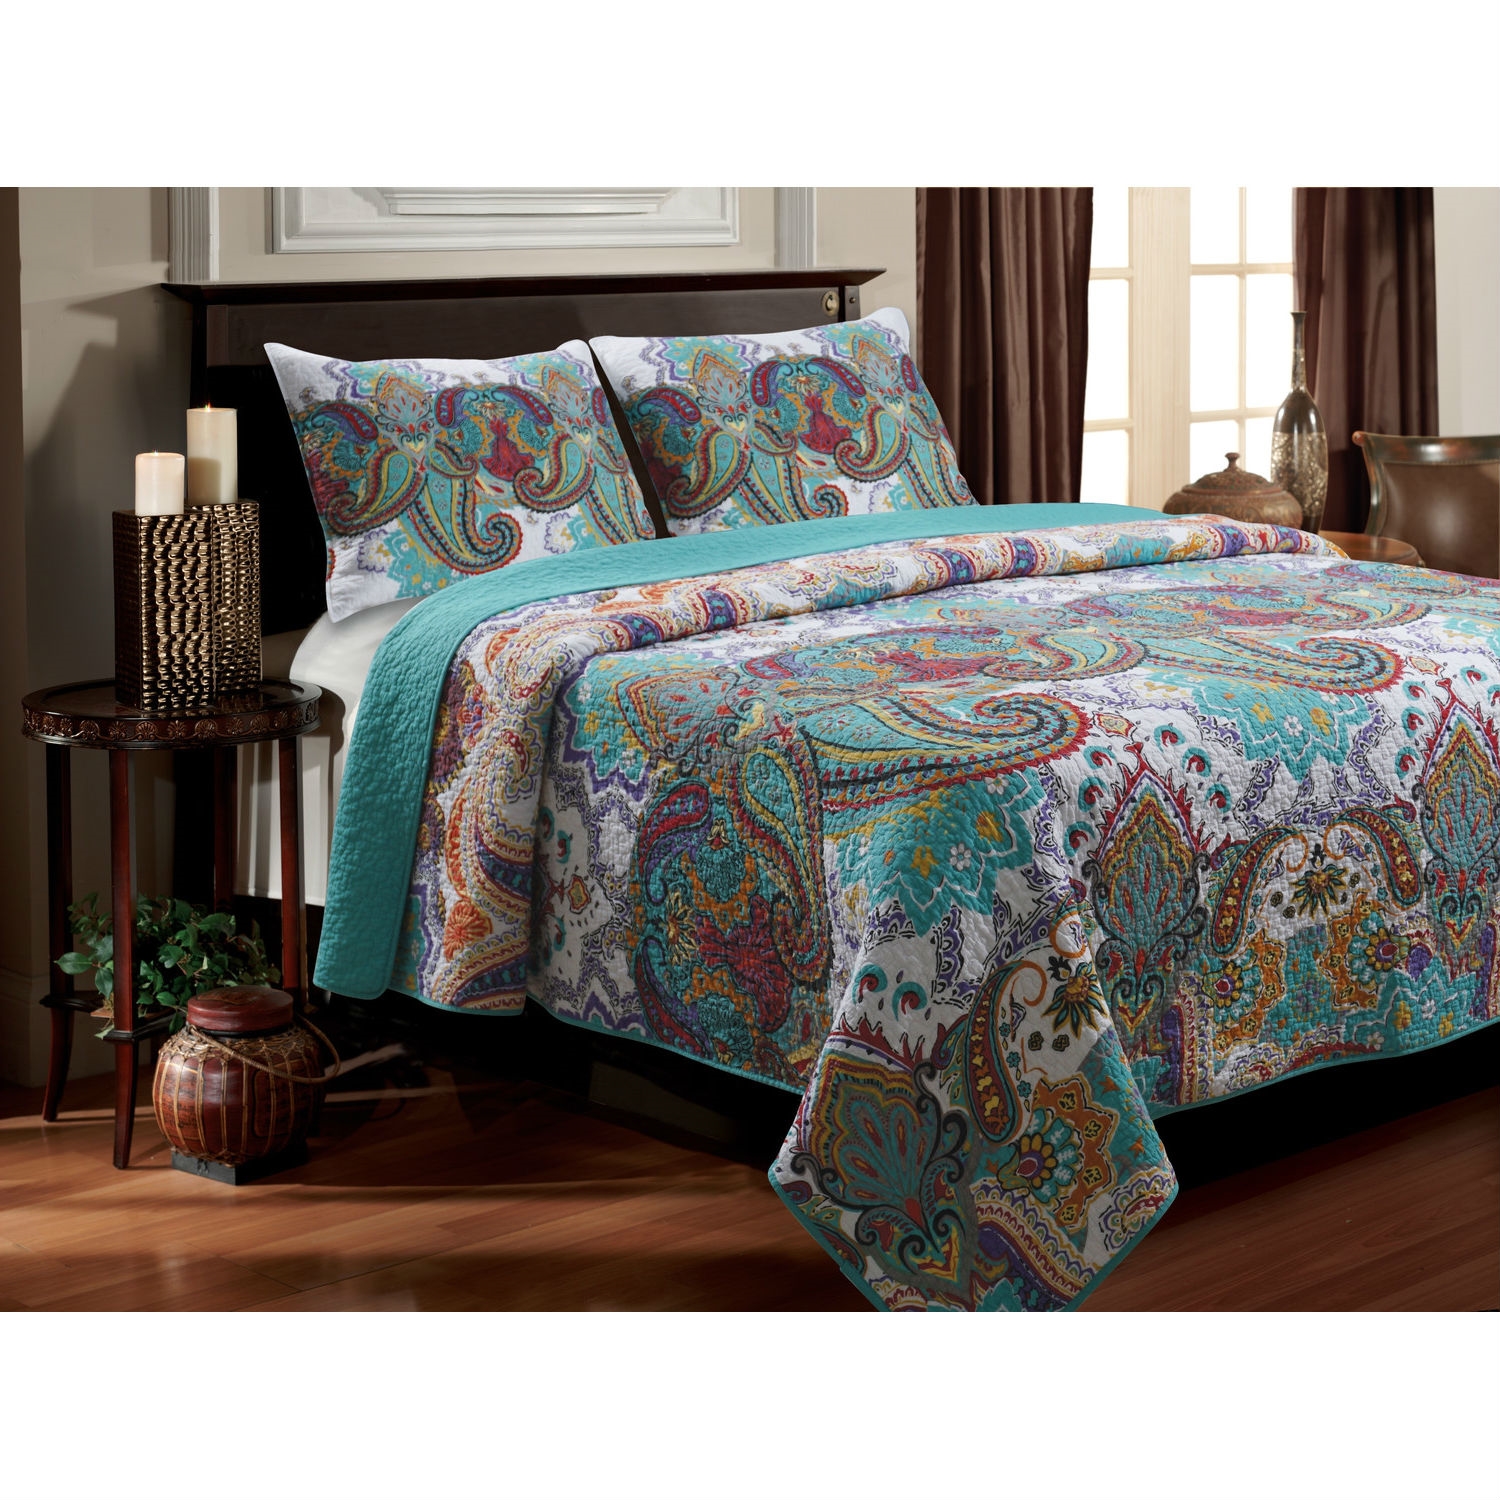 King size 100-Percent Cotton Quilt Set in Teal Paisley Pattern - Preshrunk  | FastFurnishings.com